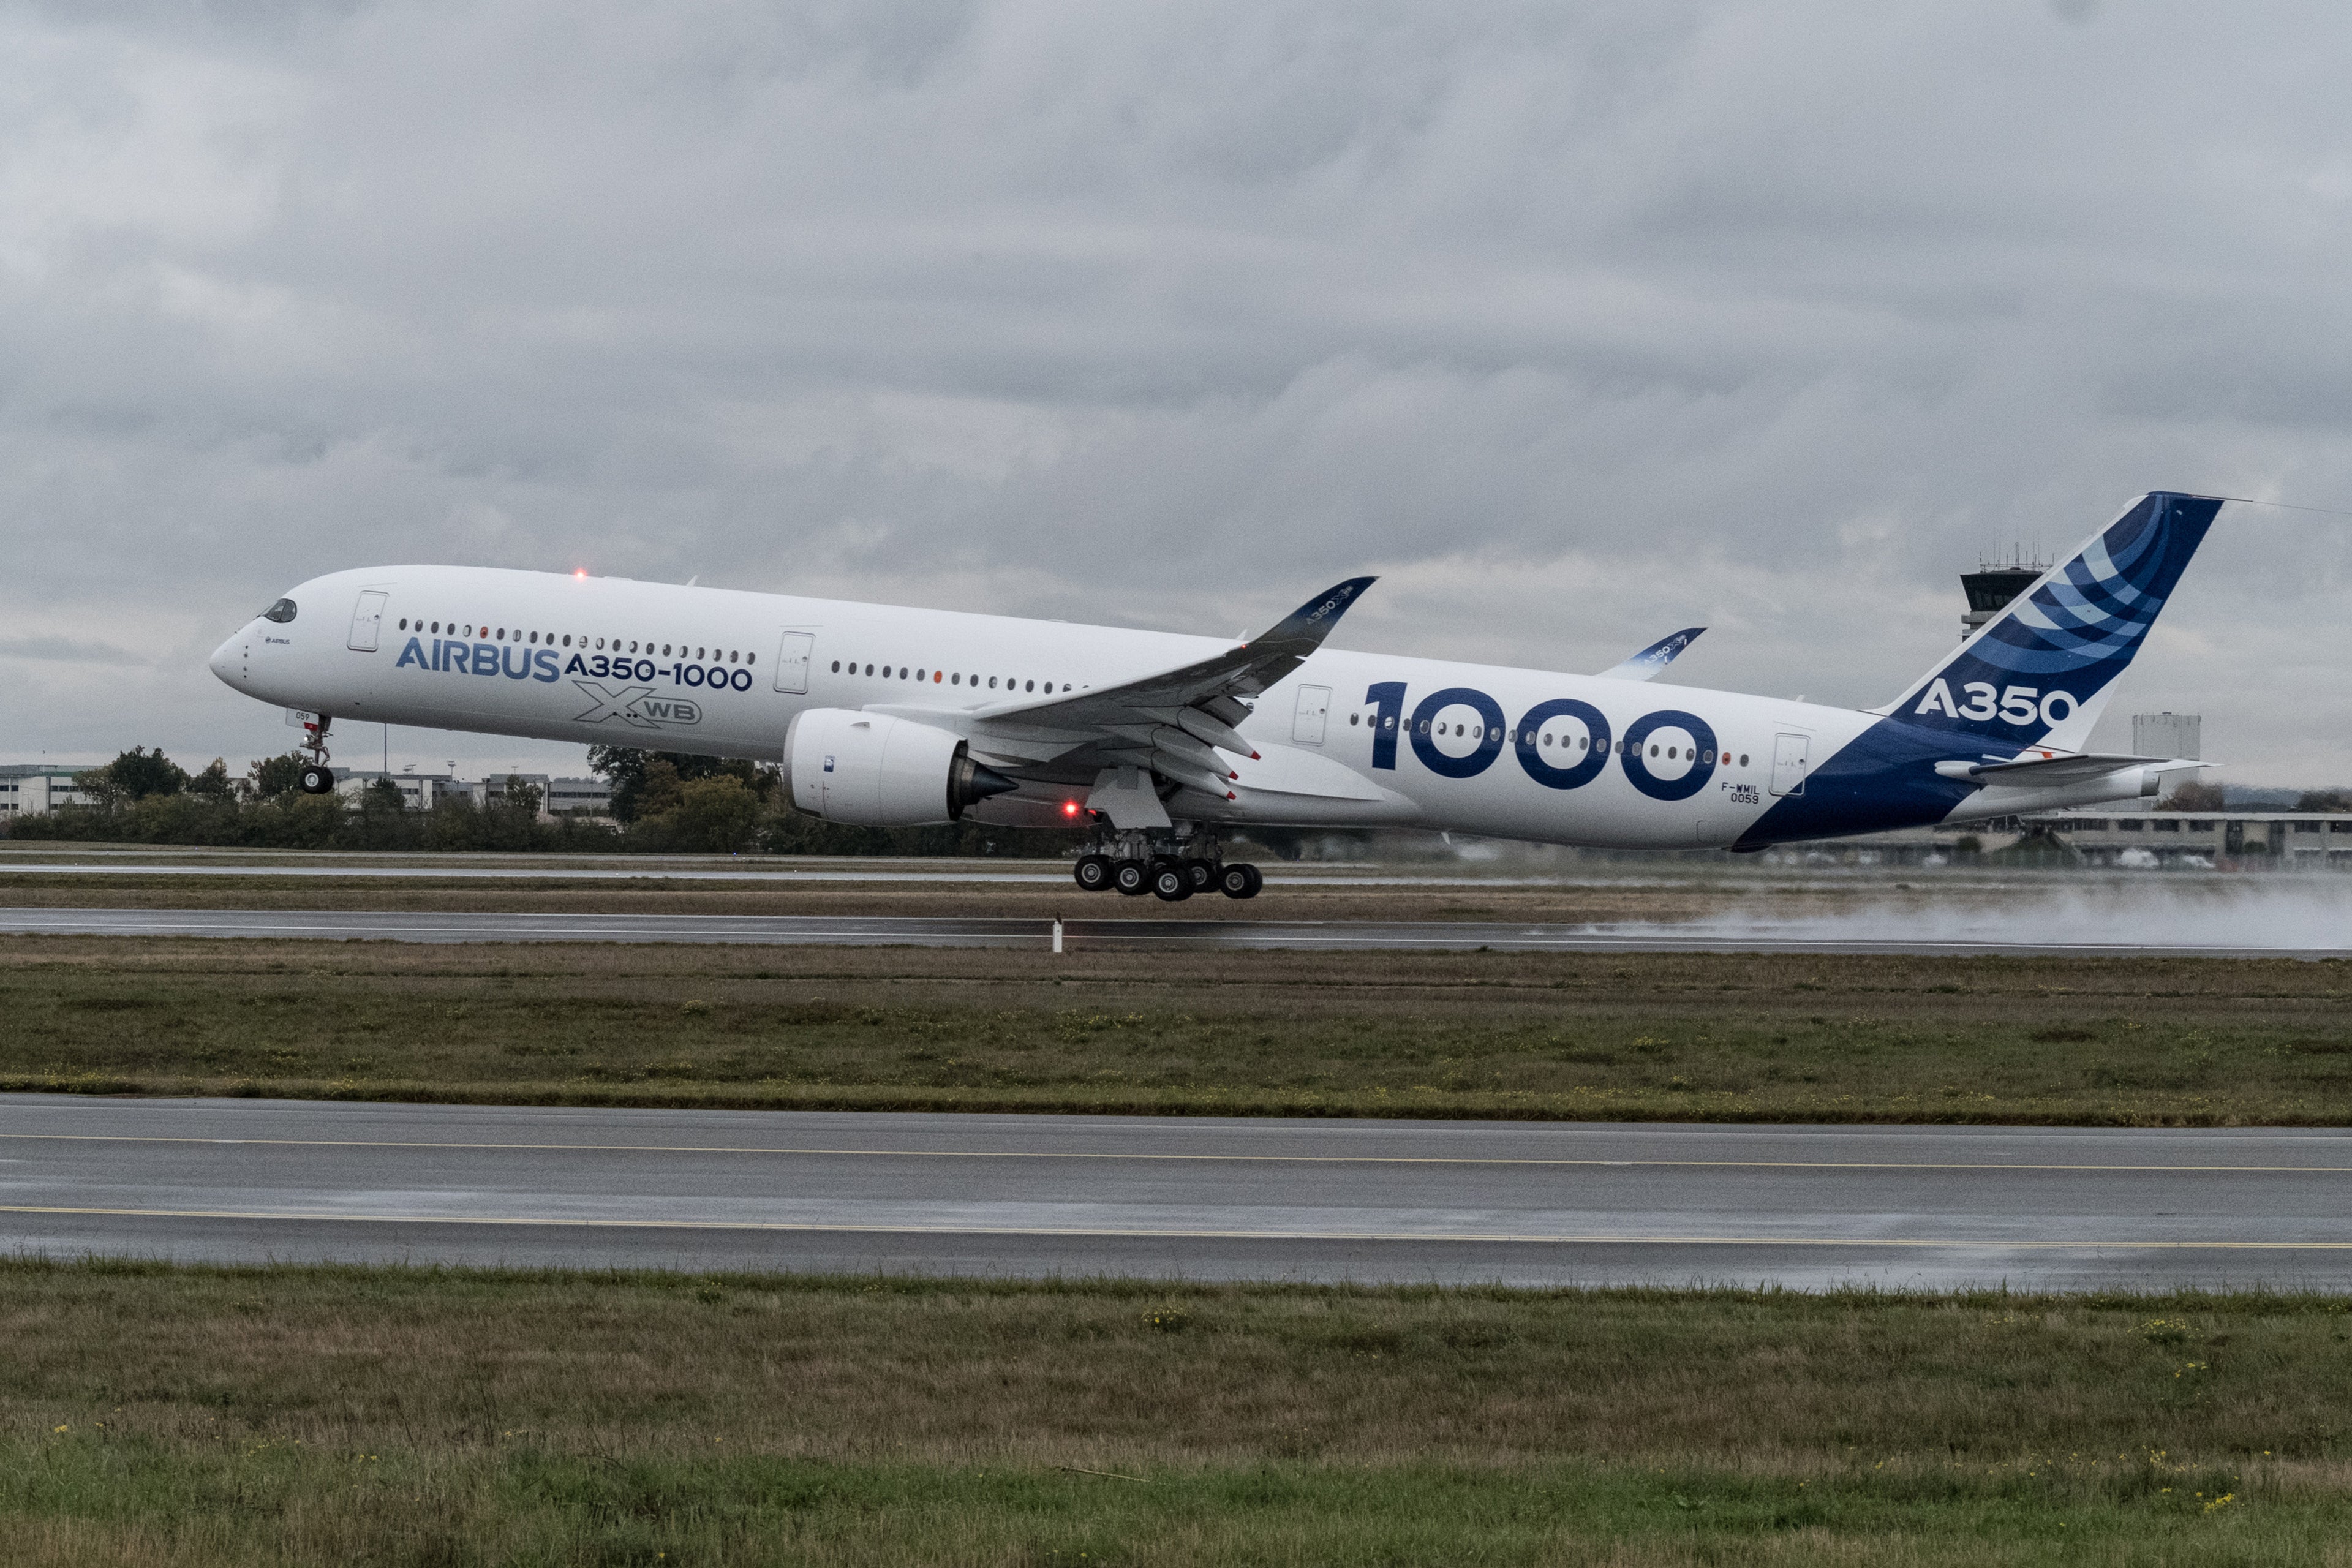 An A350-1000 twinjet passenger plane, manufactured by Airbus Group SE, takes off from the Airbus factory in Toulouse, France, on Thursday, Nov. 24, 2016. The biggest version of Airbus's A350 wide-body jet will make its first flight Thursday, swelling the twin-engine model's capacity and casting further doubt on the future of four-turbine planes including the manufacturer's own A380 and the Boeing Co. 747. Photographer: Balint Porneczi/Bloomberg via Getty Images